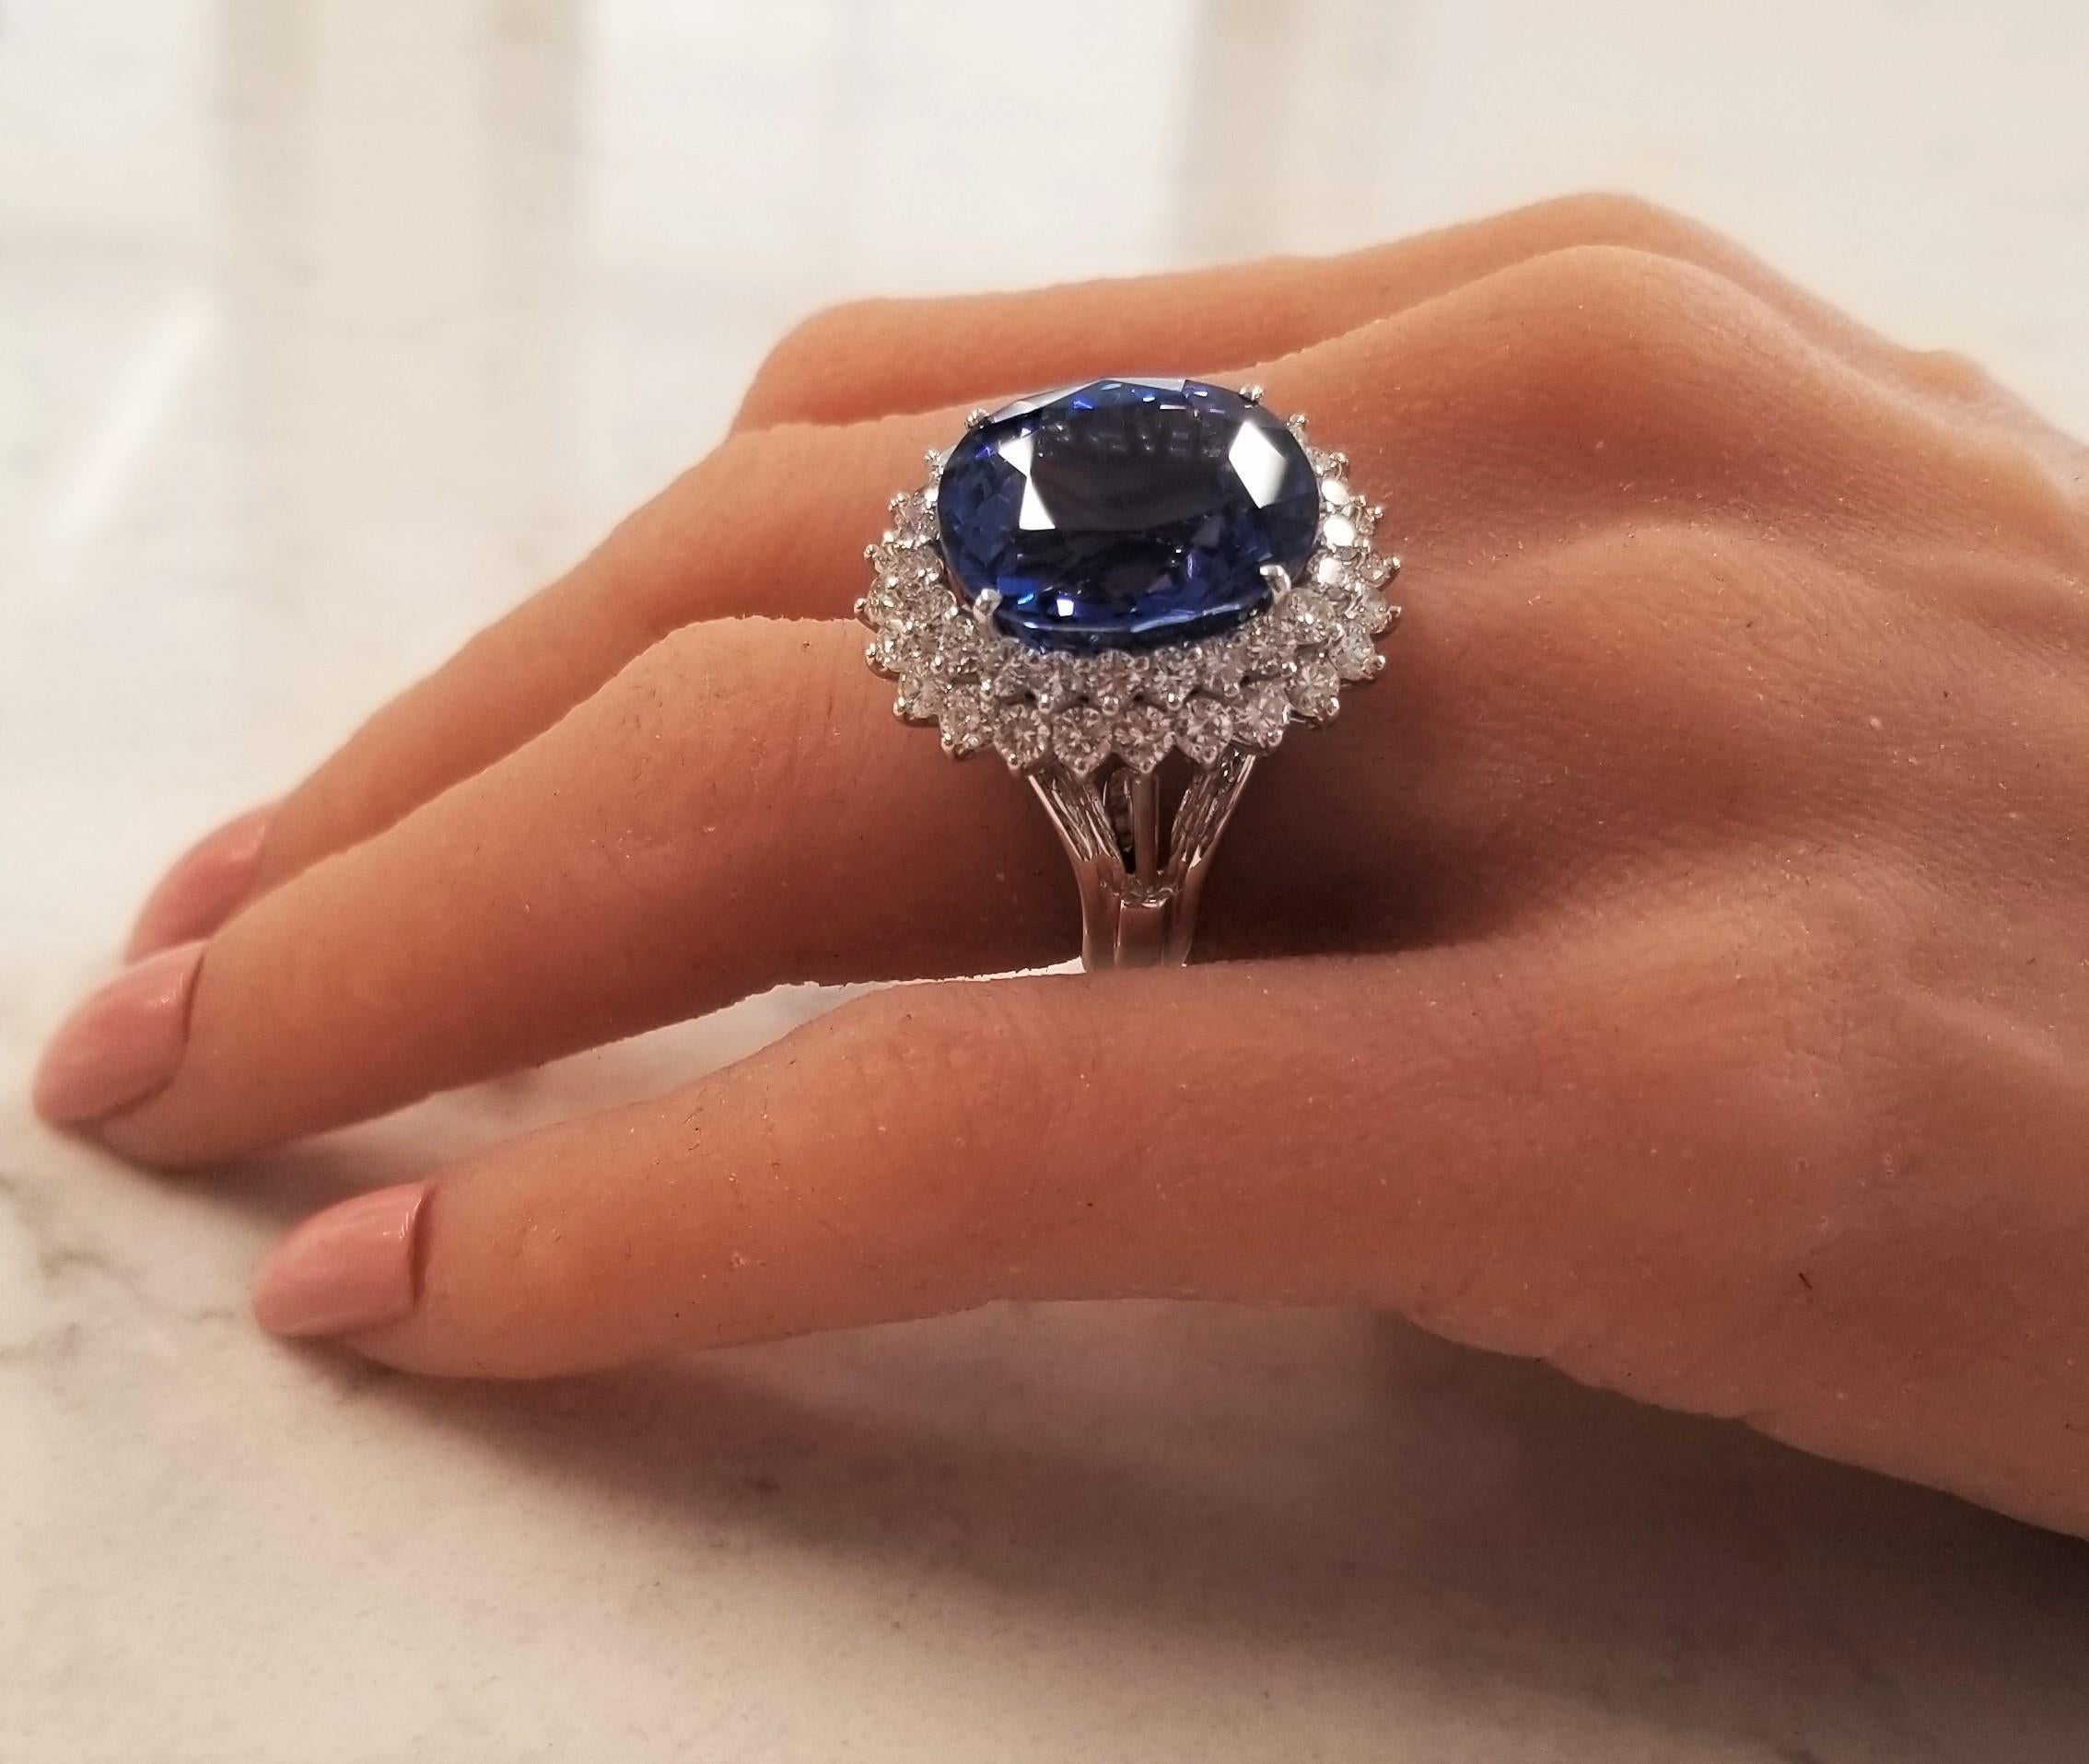 There are only 2 sapphires in the world like this. The other one is $487,000. This 26.14 carat, blue Ceylon sapphire from Sri Lanka takes the center of attention. It is non-heated, AGL certified and has an astonishing royal blue color. This is any